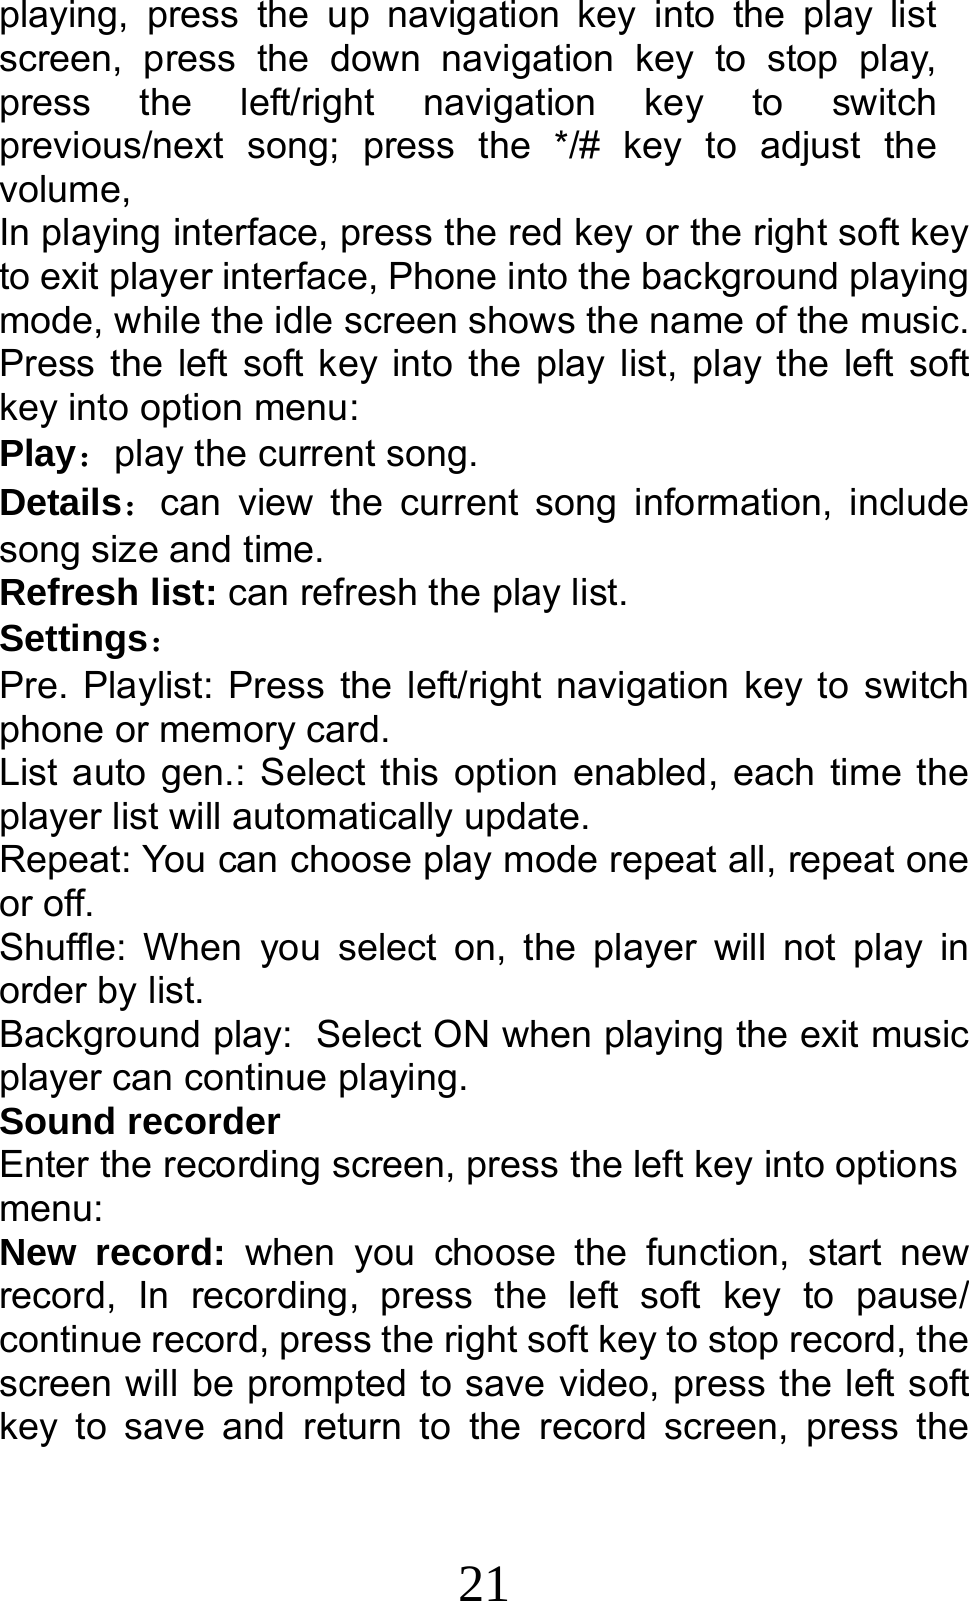 21 playing, press the up navigation key into the play list screen, press the down navigation key to stop play, press the left/right navigation key to switch previous/next song; press the */# key to adjust the volume, In playing interface, press the red key or the right soft key to exit player interface, Phone into the background playing mode, while the idle screen shows the name of the music. Press the left soft key into the play list, play the left soft key into option menu: Play：play the current song. Details：can view the current song information, include song size and time. Refresh list: can refresh the play list. Settings： Pre. Playlist: Press the left/right navigation key to switch phone or memory card. List auto gen.: Select this option enabled, each time the player list will automatically update. Repeat: You can choose play mode repeat all, repeat one or off. Shuffle: When you select on, the player will not play in order by list. Background play: Select ON when playing the exit music player can continue playing. Sound recorder Enter the recording screen, press the left key into options menu: New record: when you choose the function, start new record, In recording, press the left soft key to pause/ continue record, press the right soft key to stop record, the screen will be prompted to save video, press the left soft key to save and return to the record screen, press the 